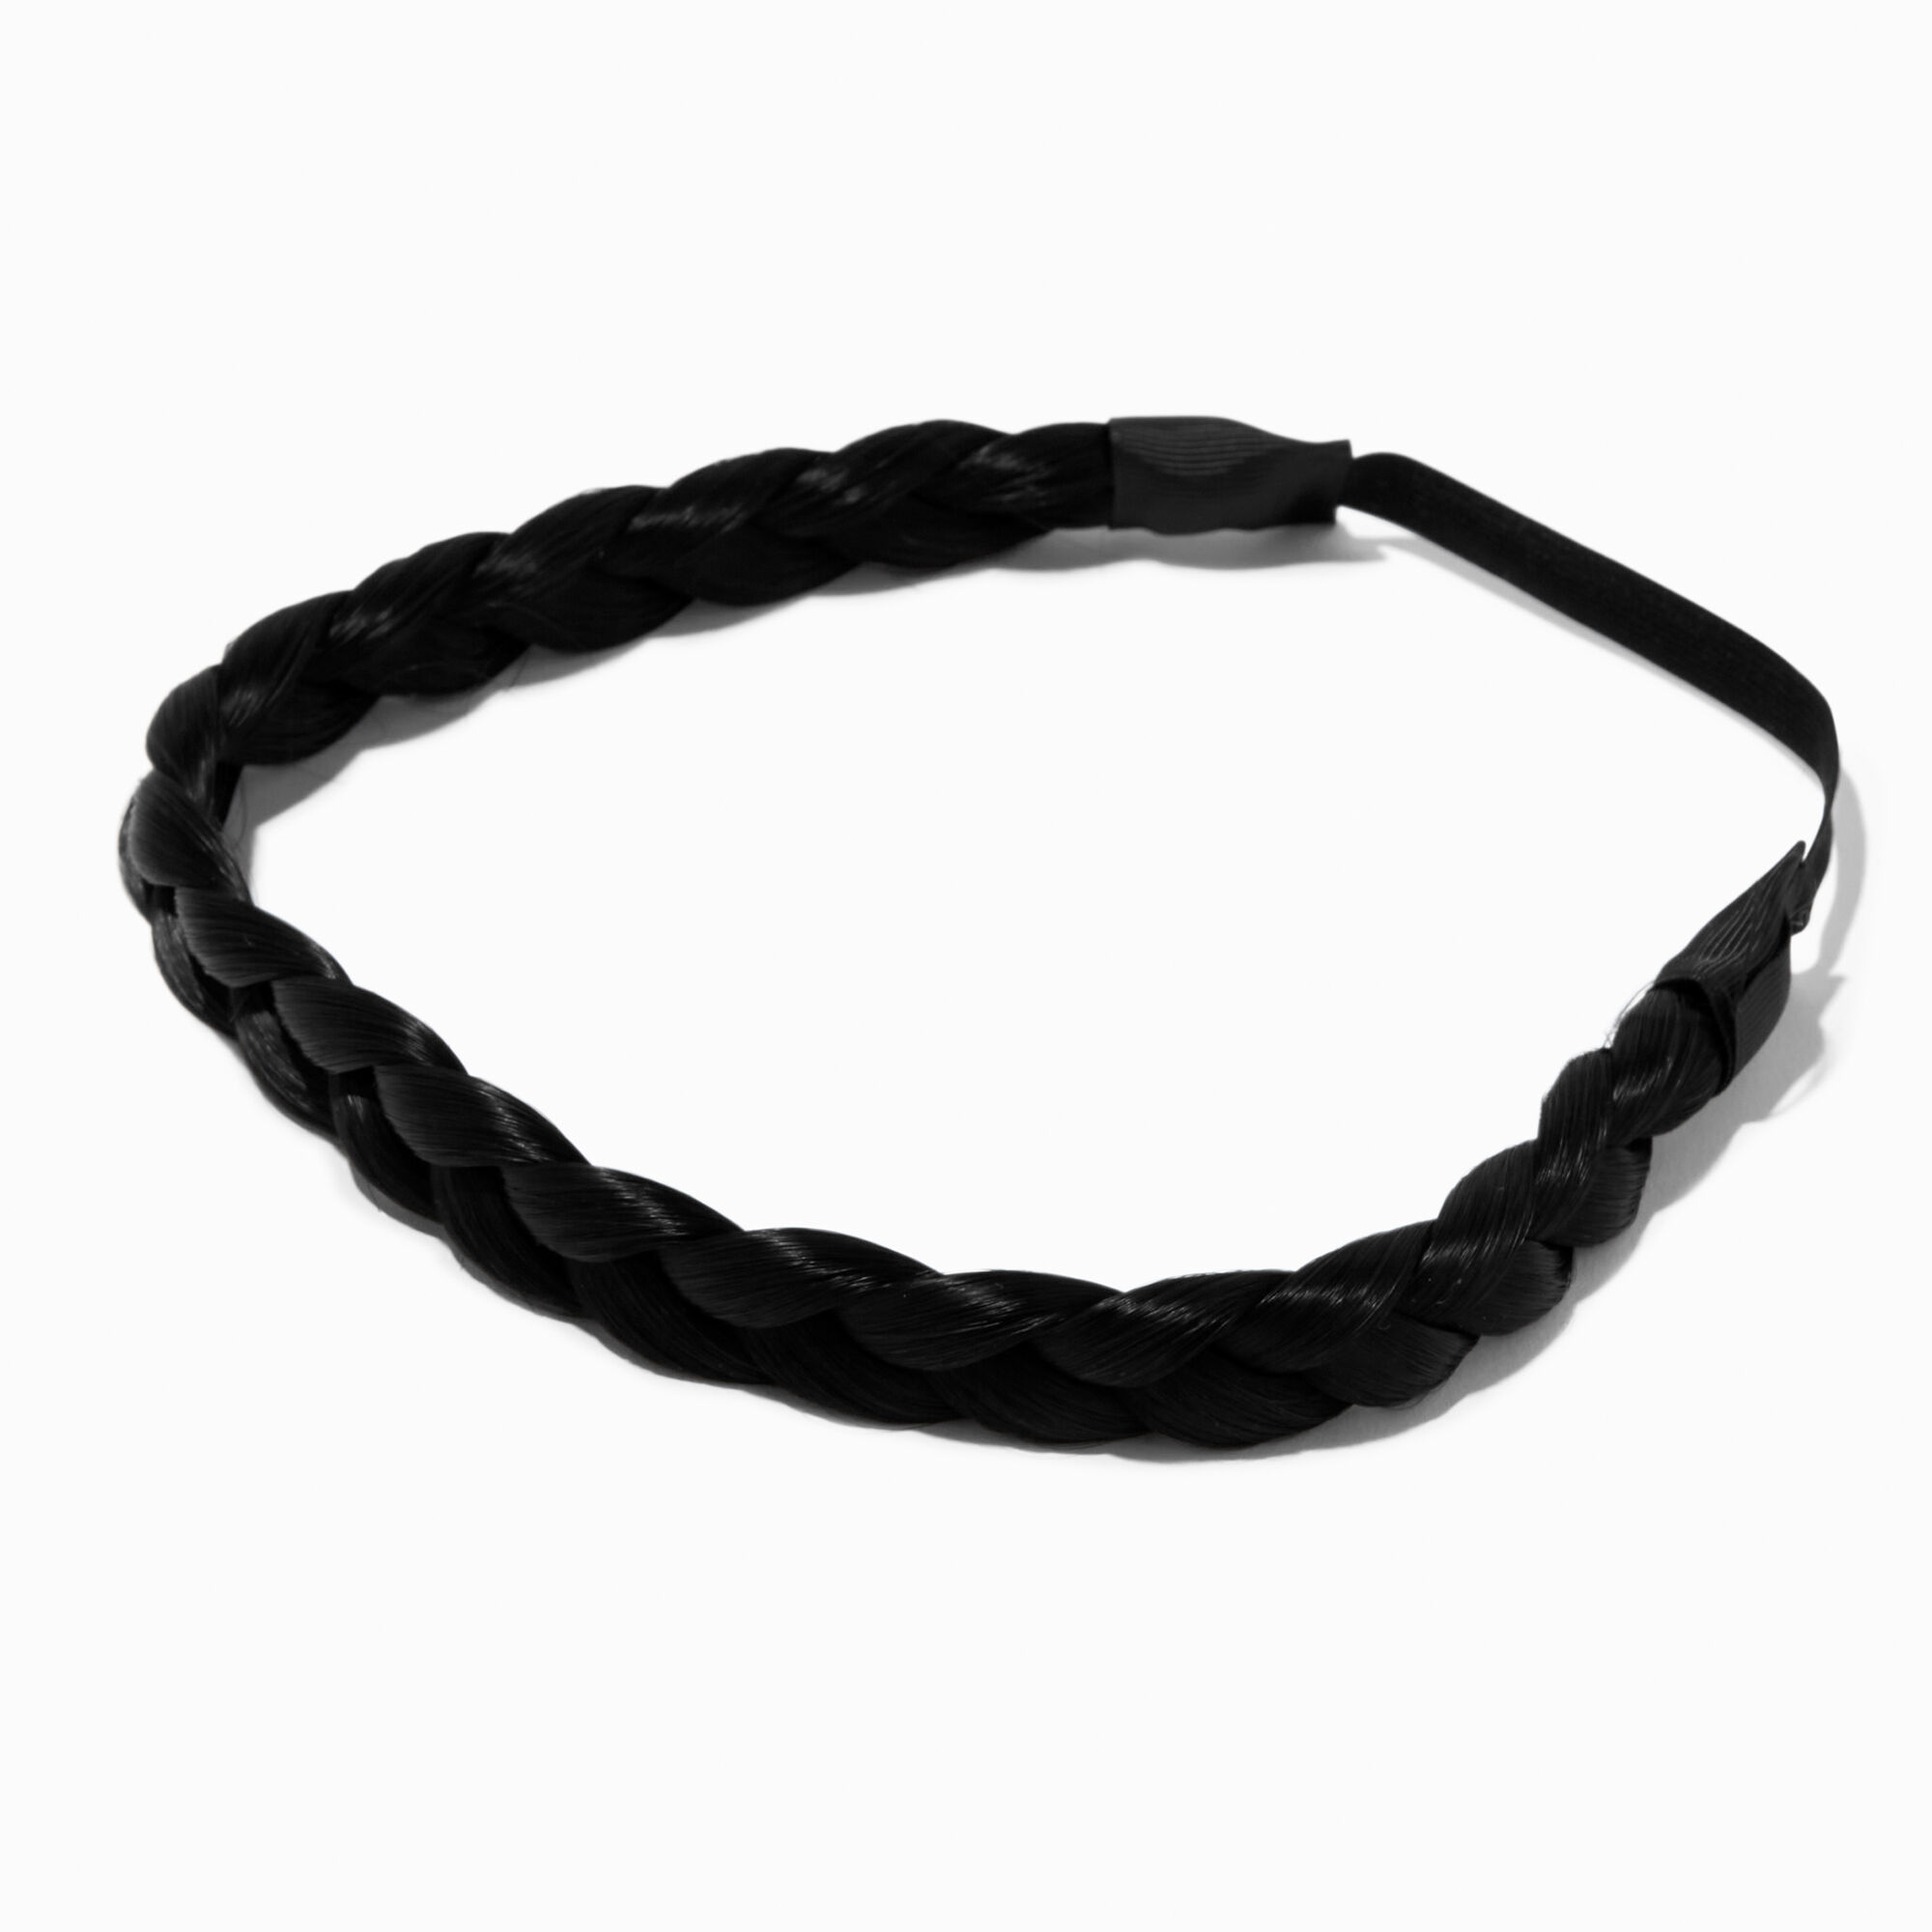 View Claires Braided Faux Hair Headwrap Black information